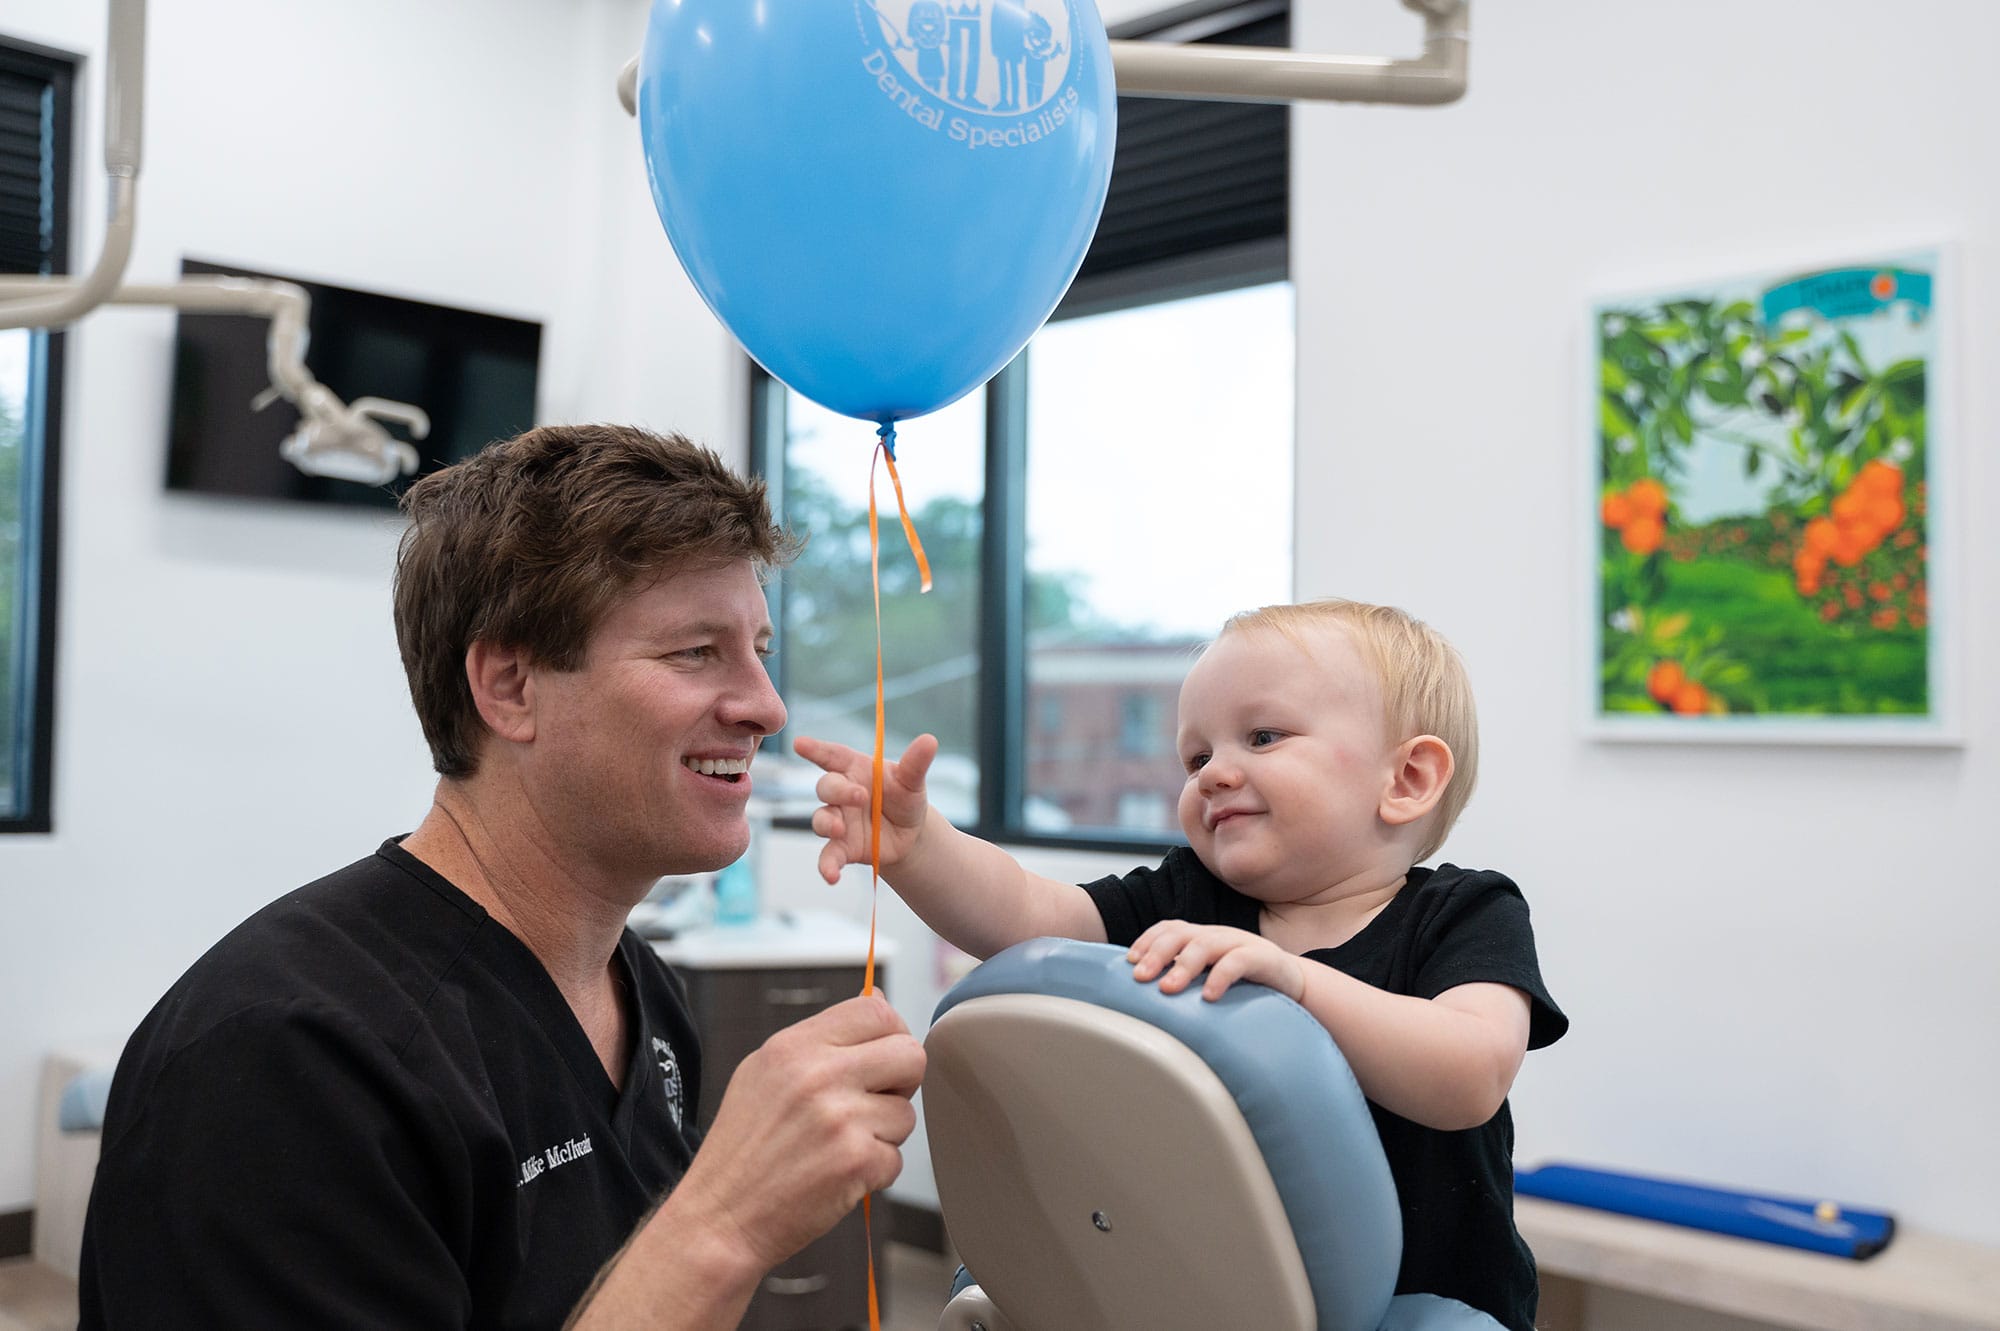 A baby reaches for a balloon at the dentist's office